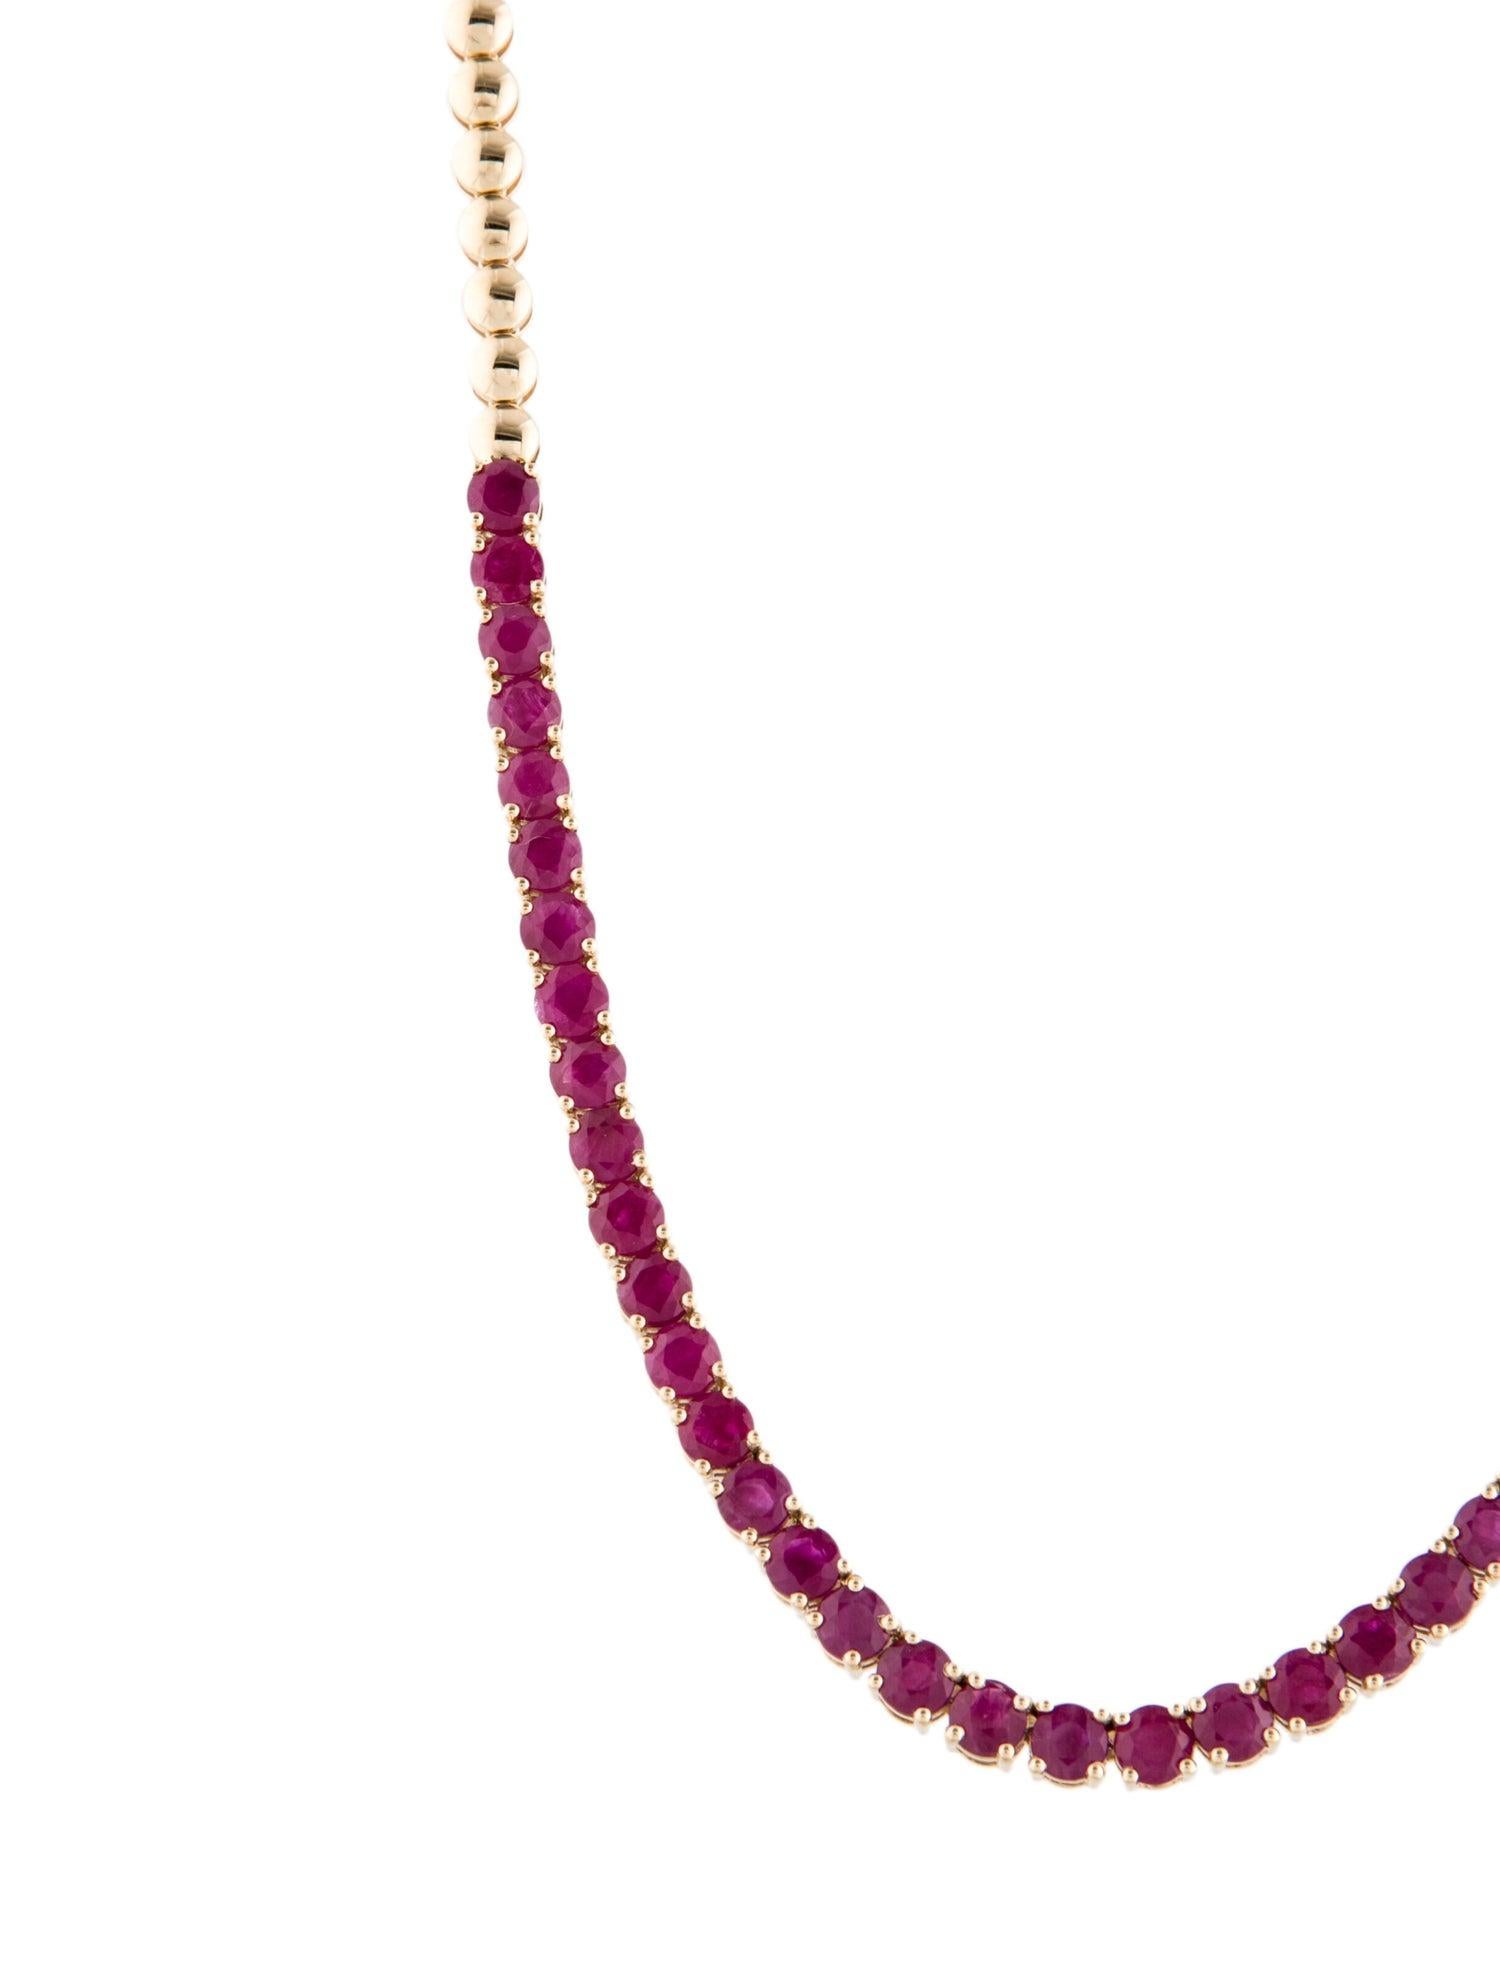 Women's 14K Ruby Chain Necklace 15.92ctw - Luxurious Jewelry Piece for Timeless Elegance For Sale